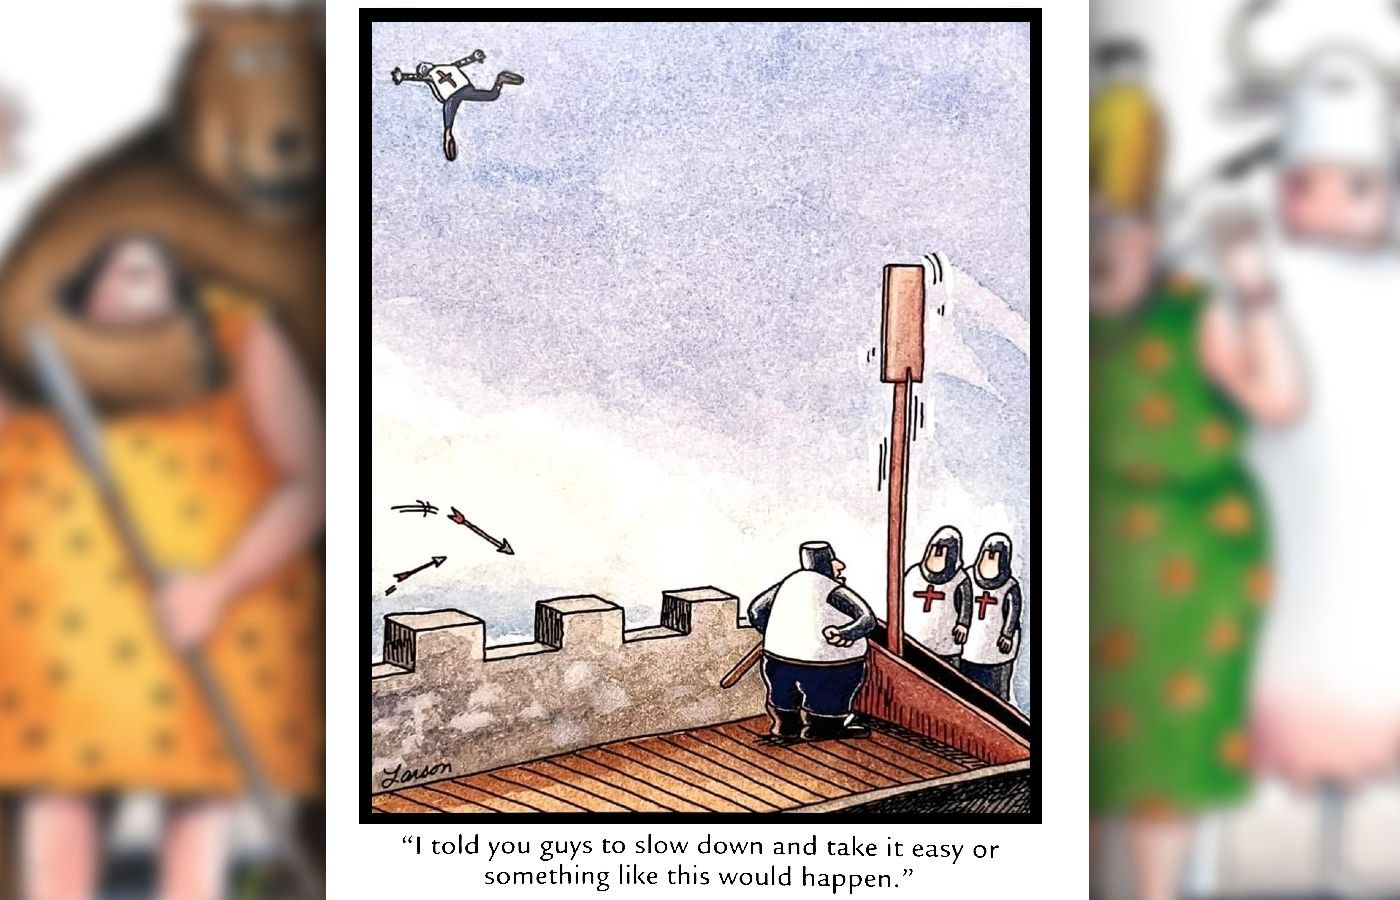 far side comic where someone is accidentally fired from a catapult